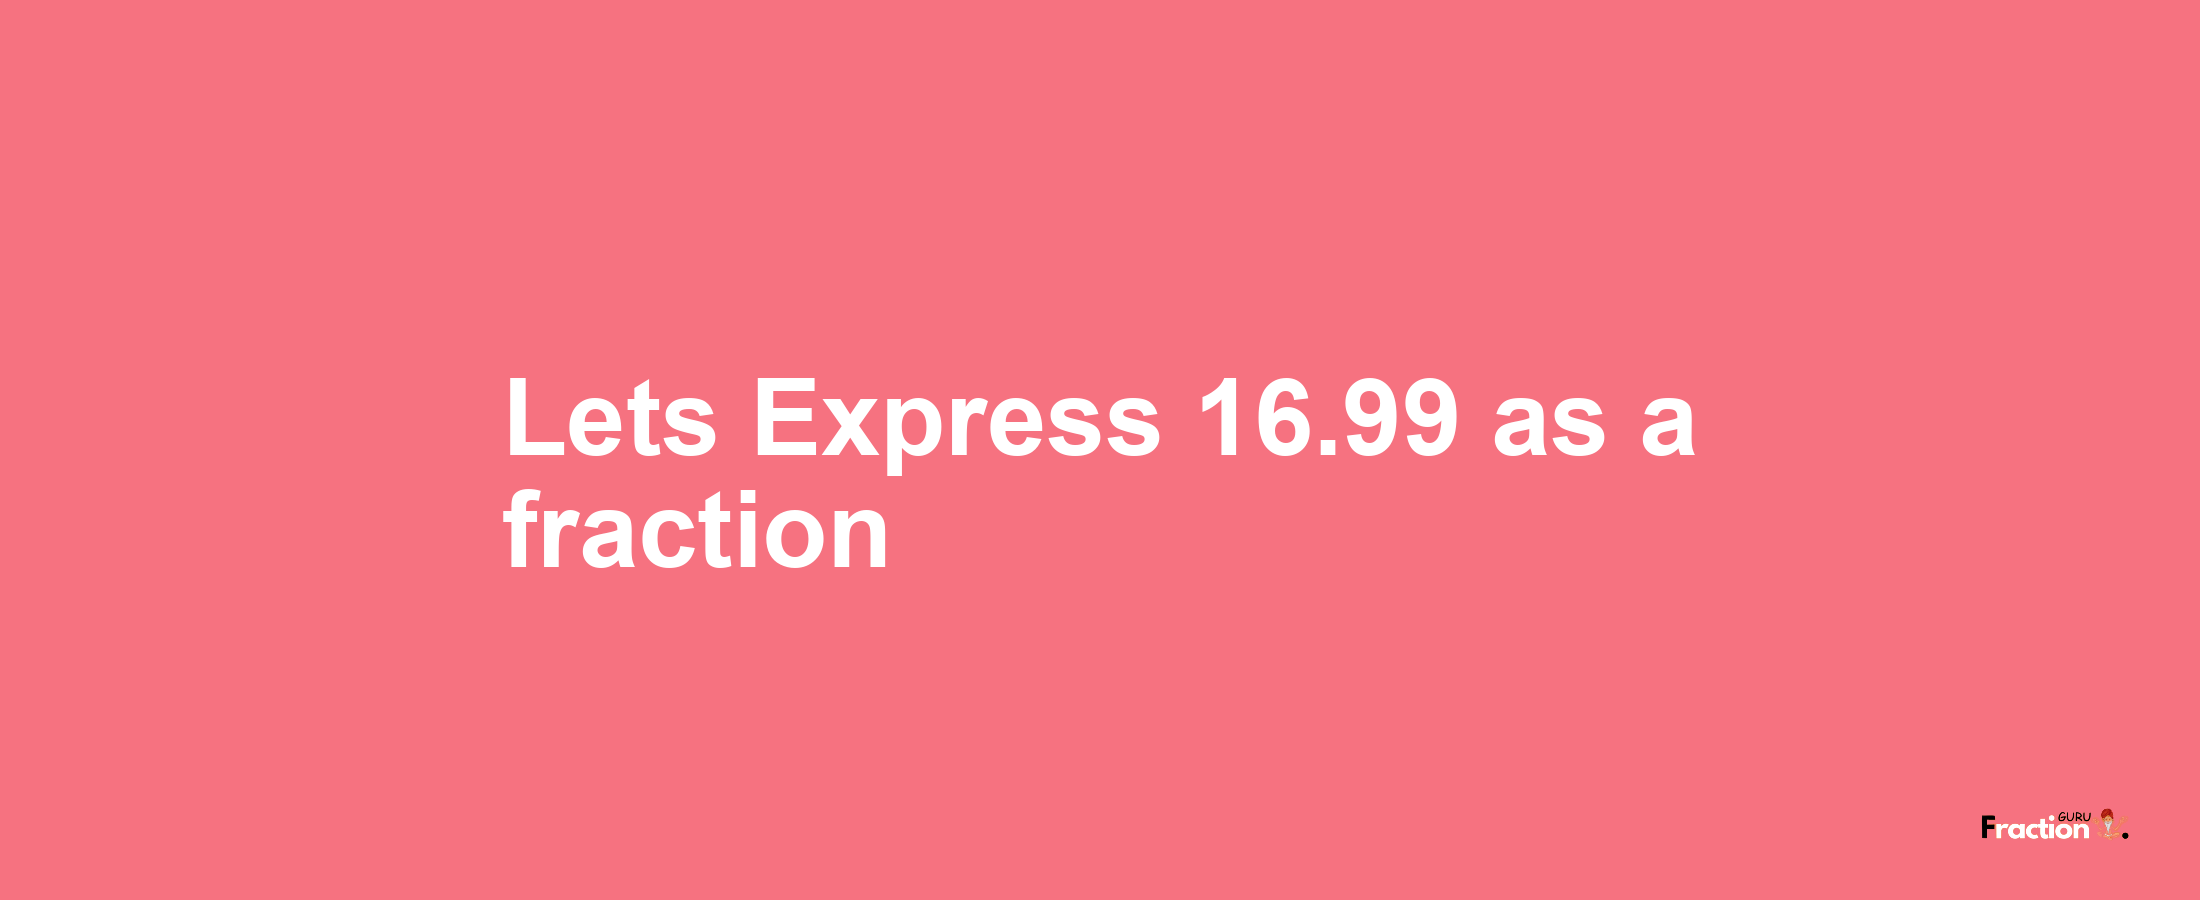 Lets Express 16.99 as afraction